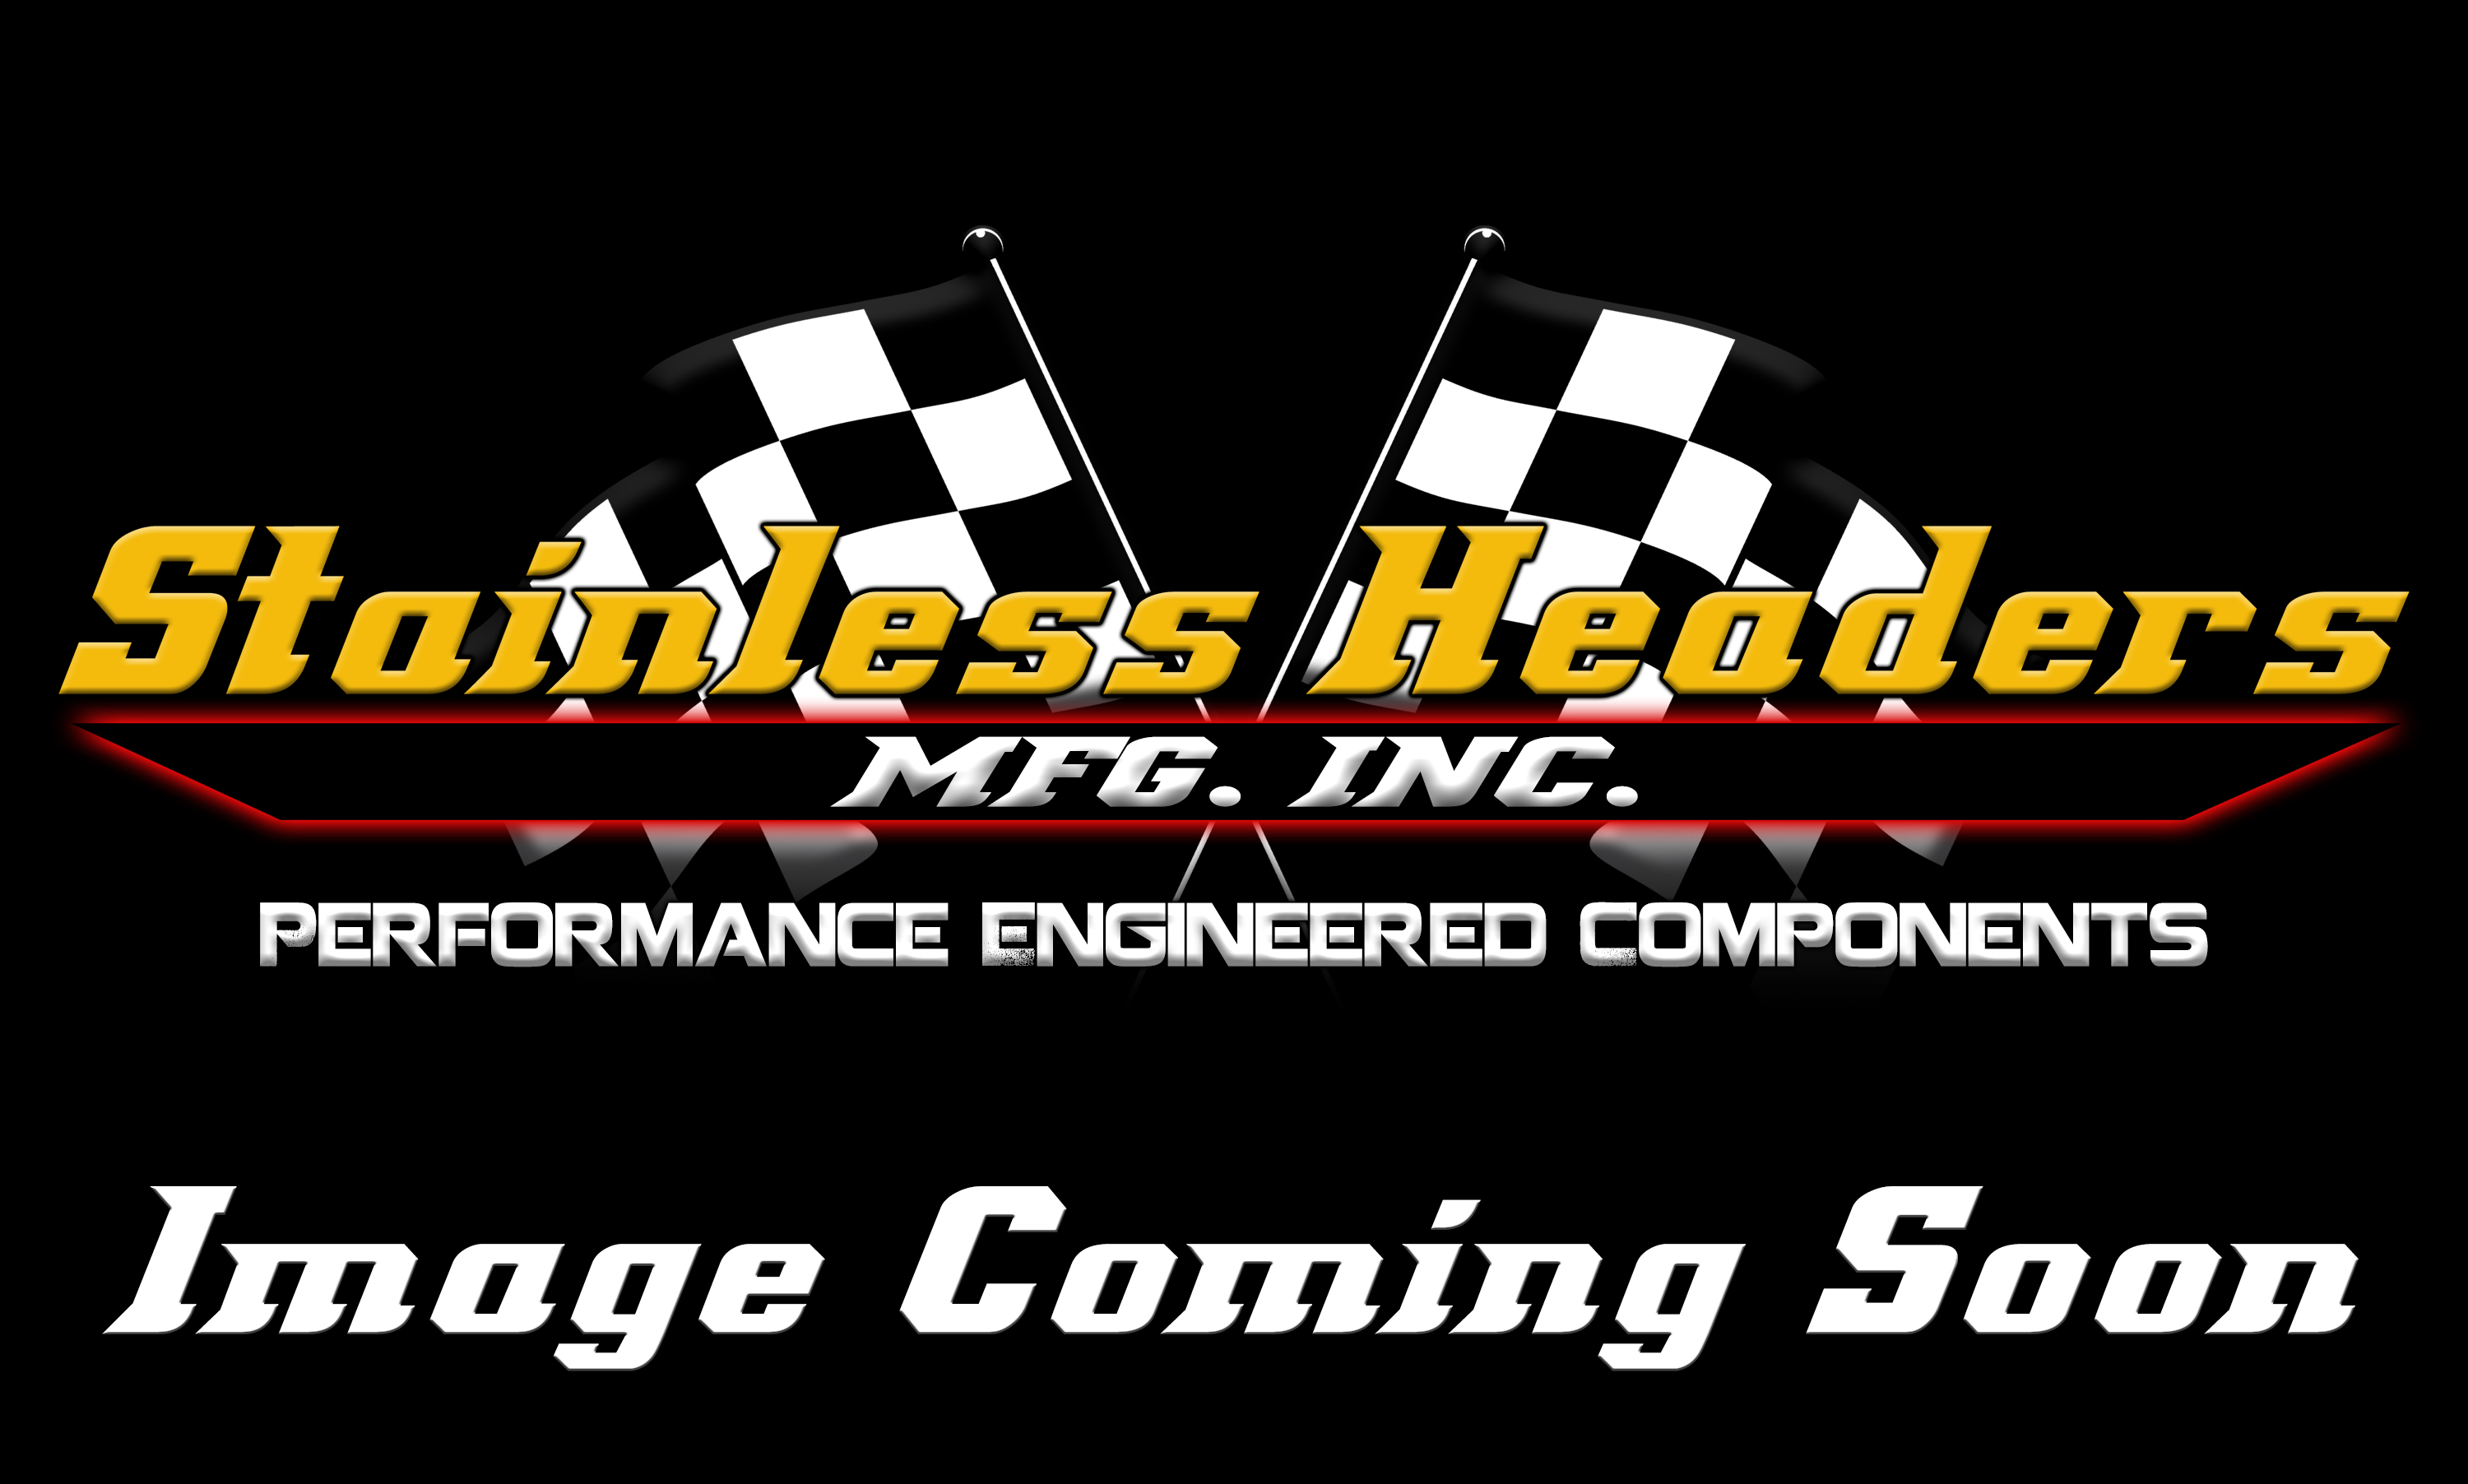 Stainless Headers - 2 1/8" Primary 4 into 1 Performance Merge Collector-16ga 304ss